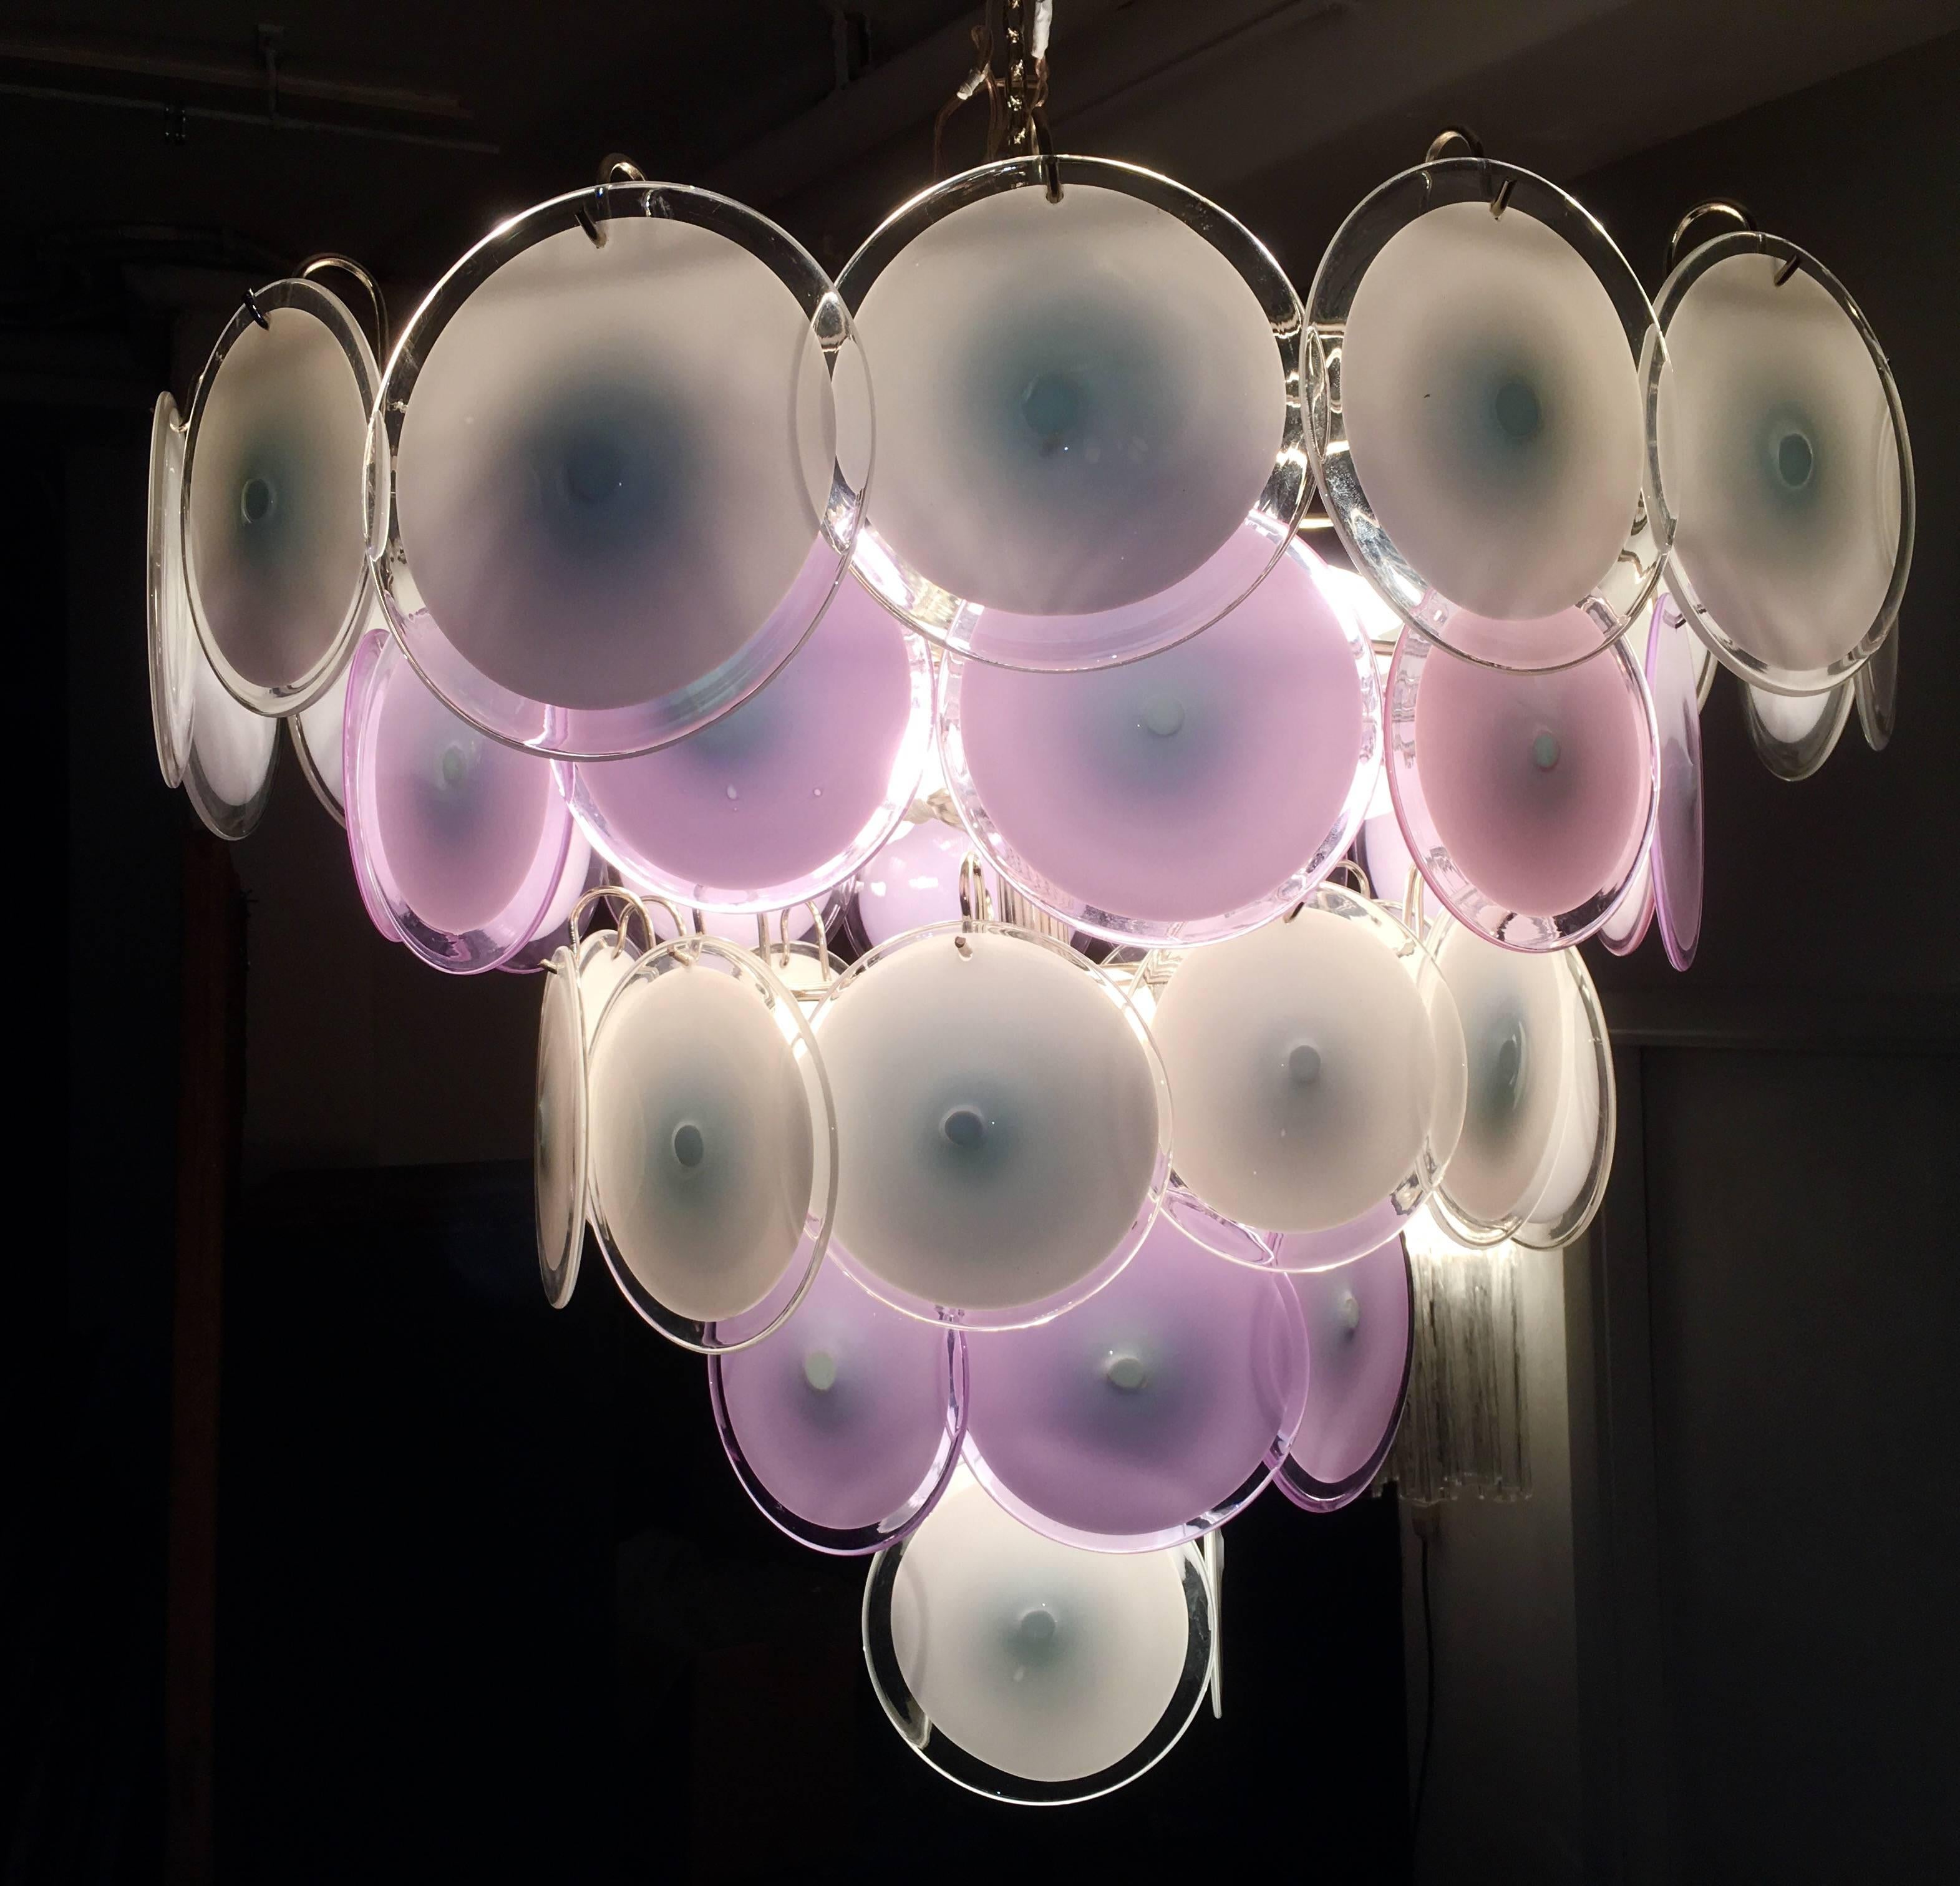 Spectacular chandelier by Vistosi made ​​of 50 Murano discs white and violet put on 5 floors.

Six available items with matching wall sconces.